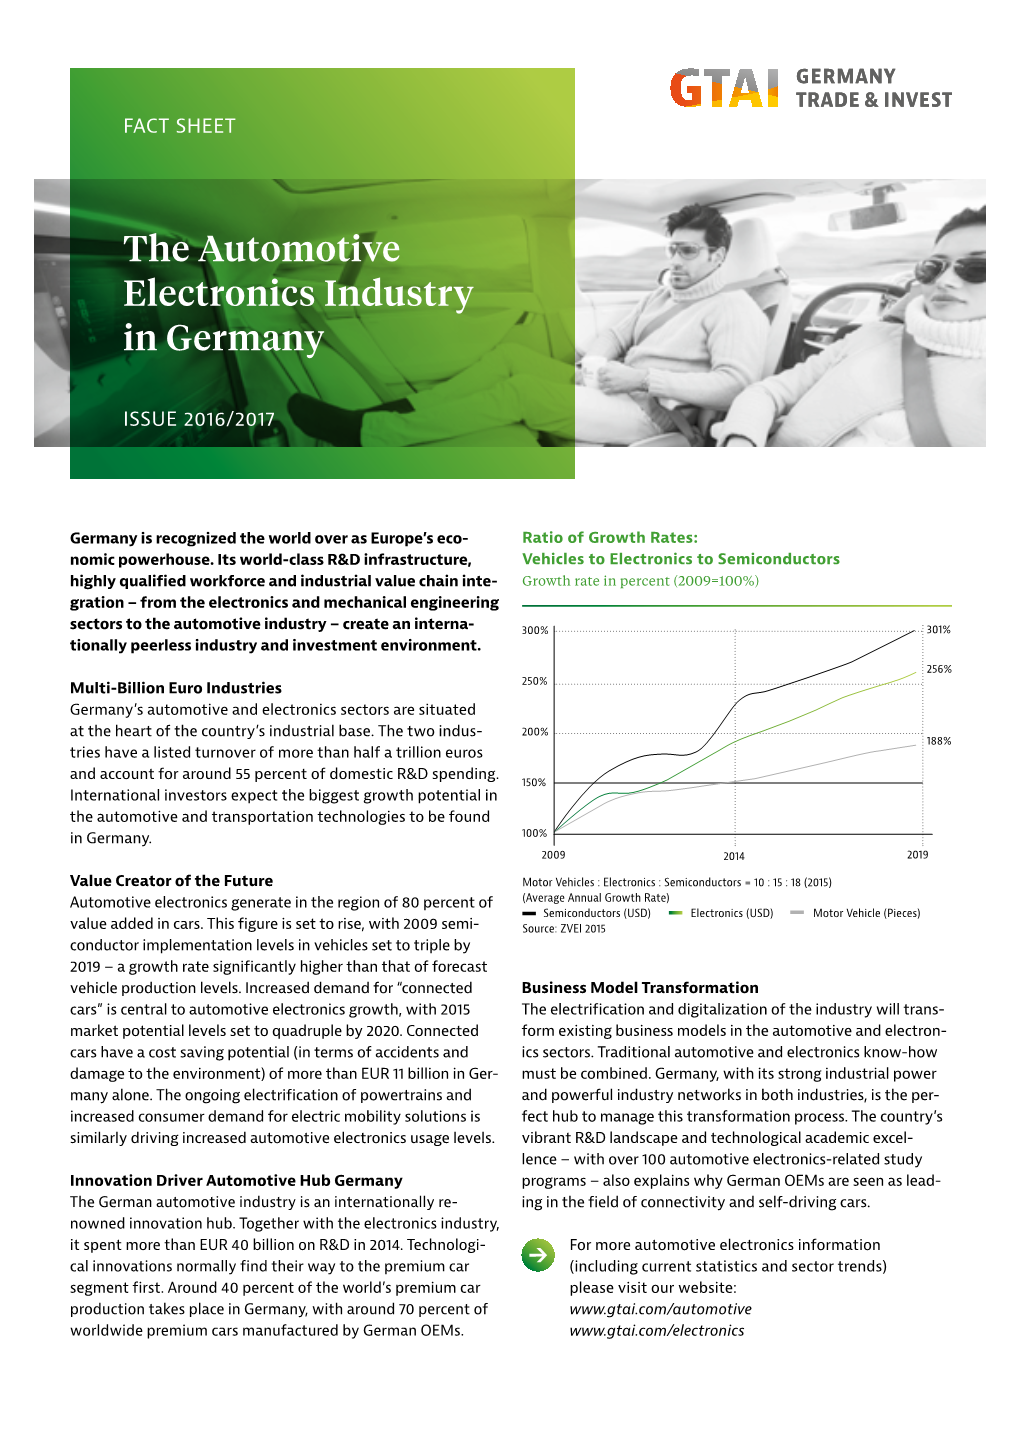 The Automotive Electronics Industry in Germany